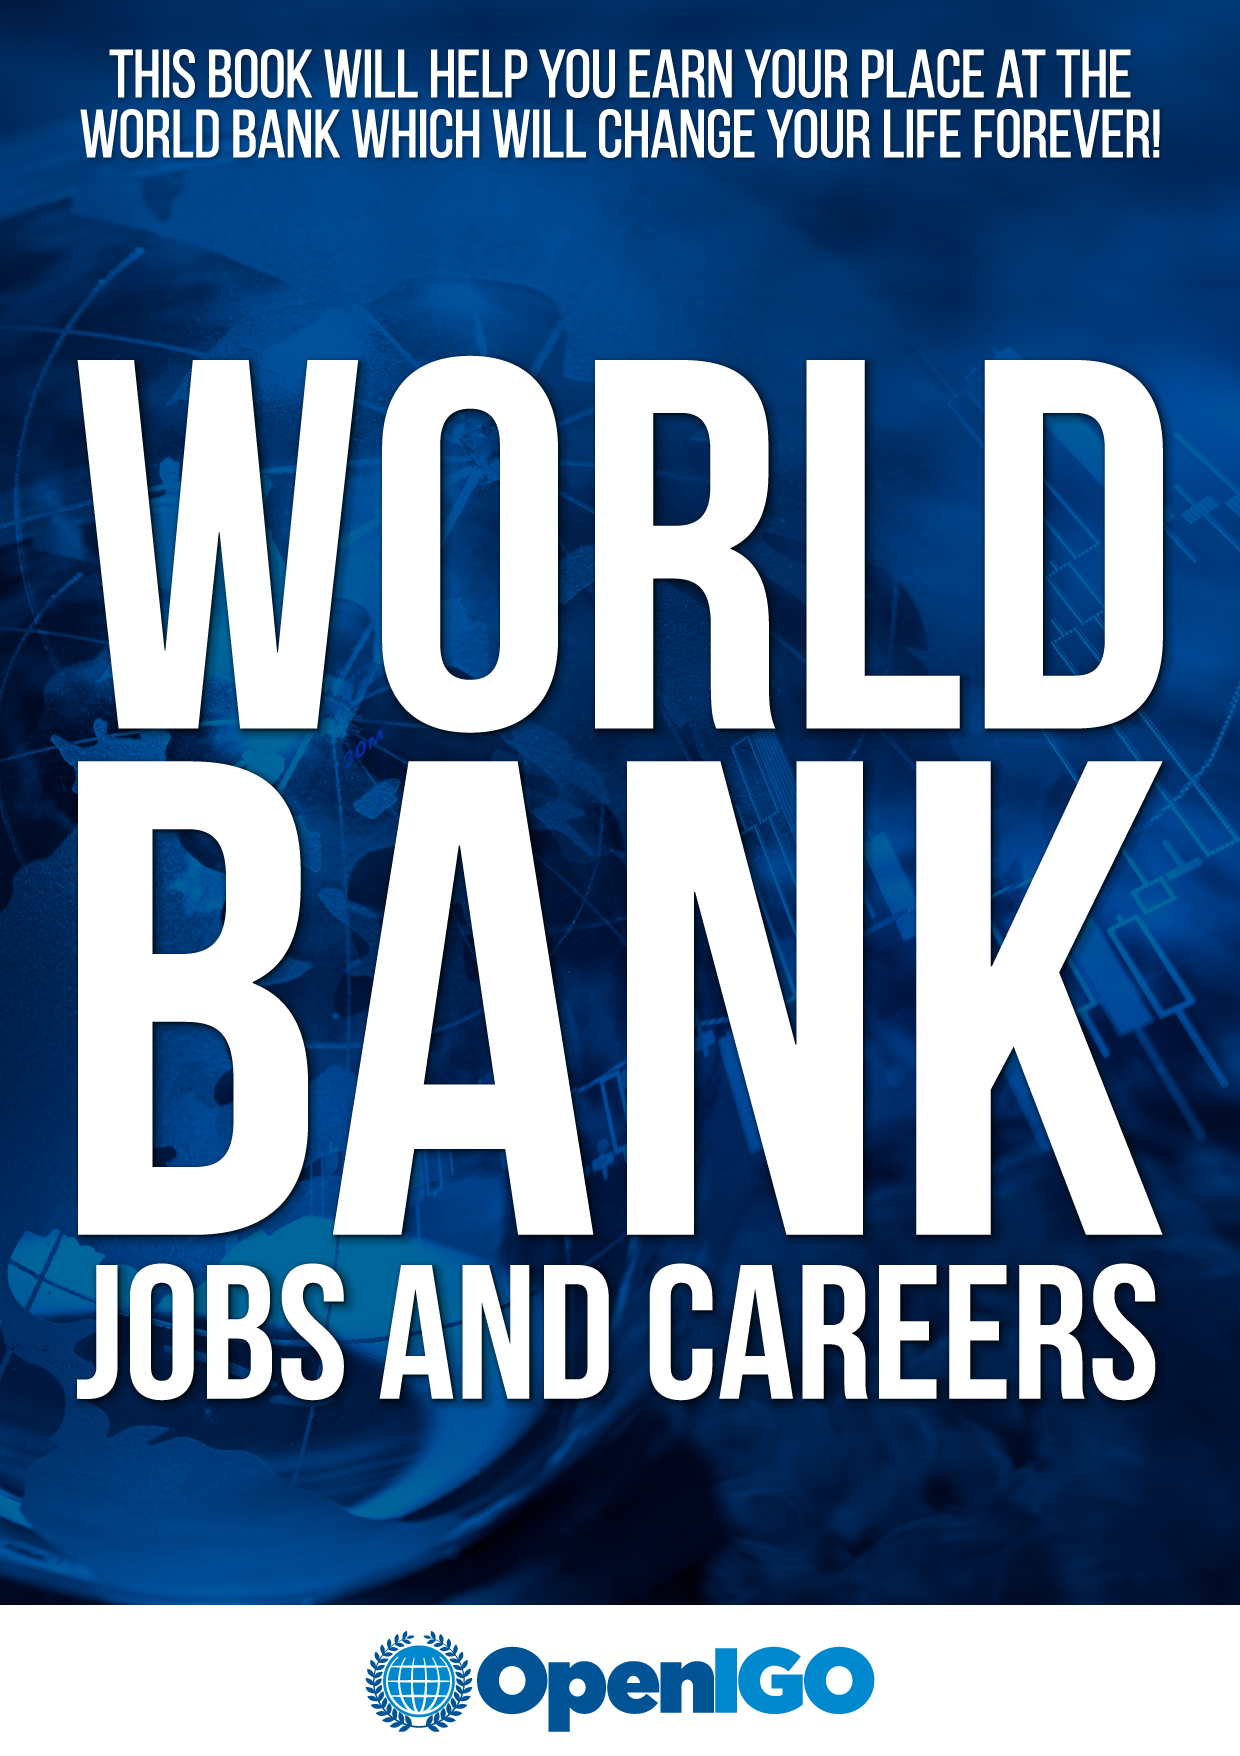 World Bank Jobs and Careers Book Cover